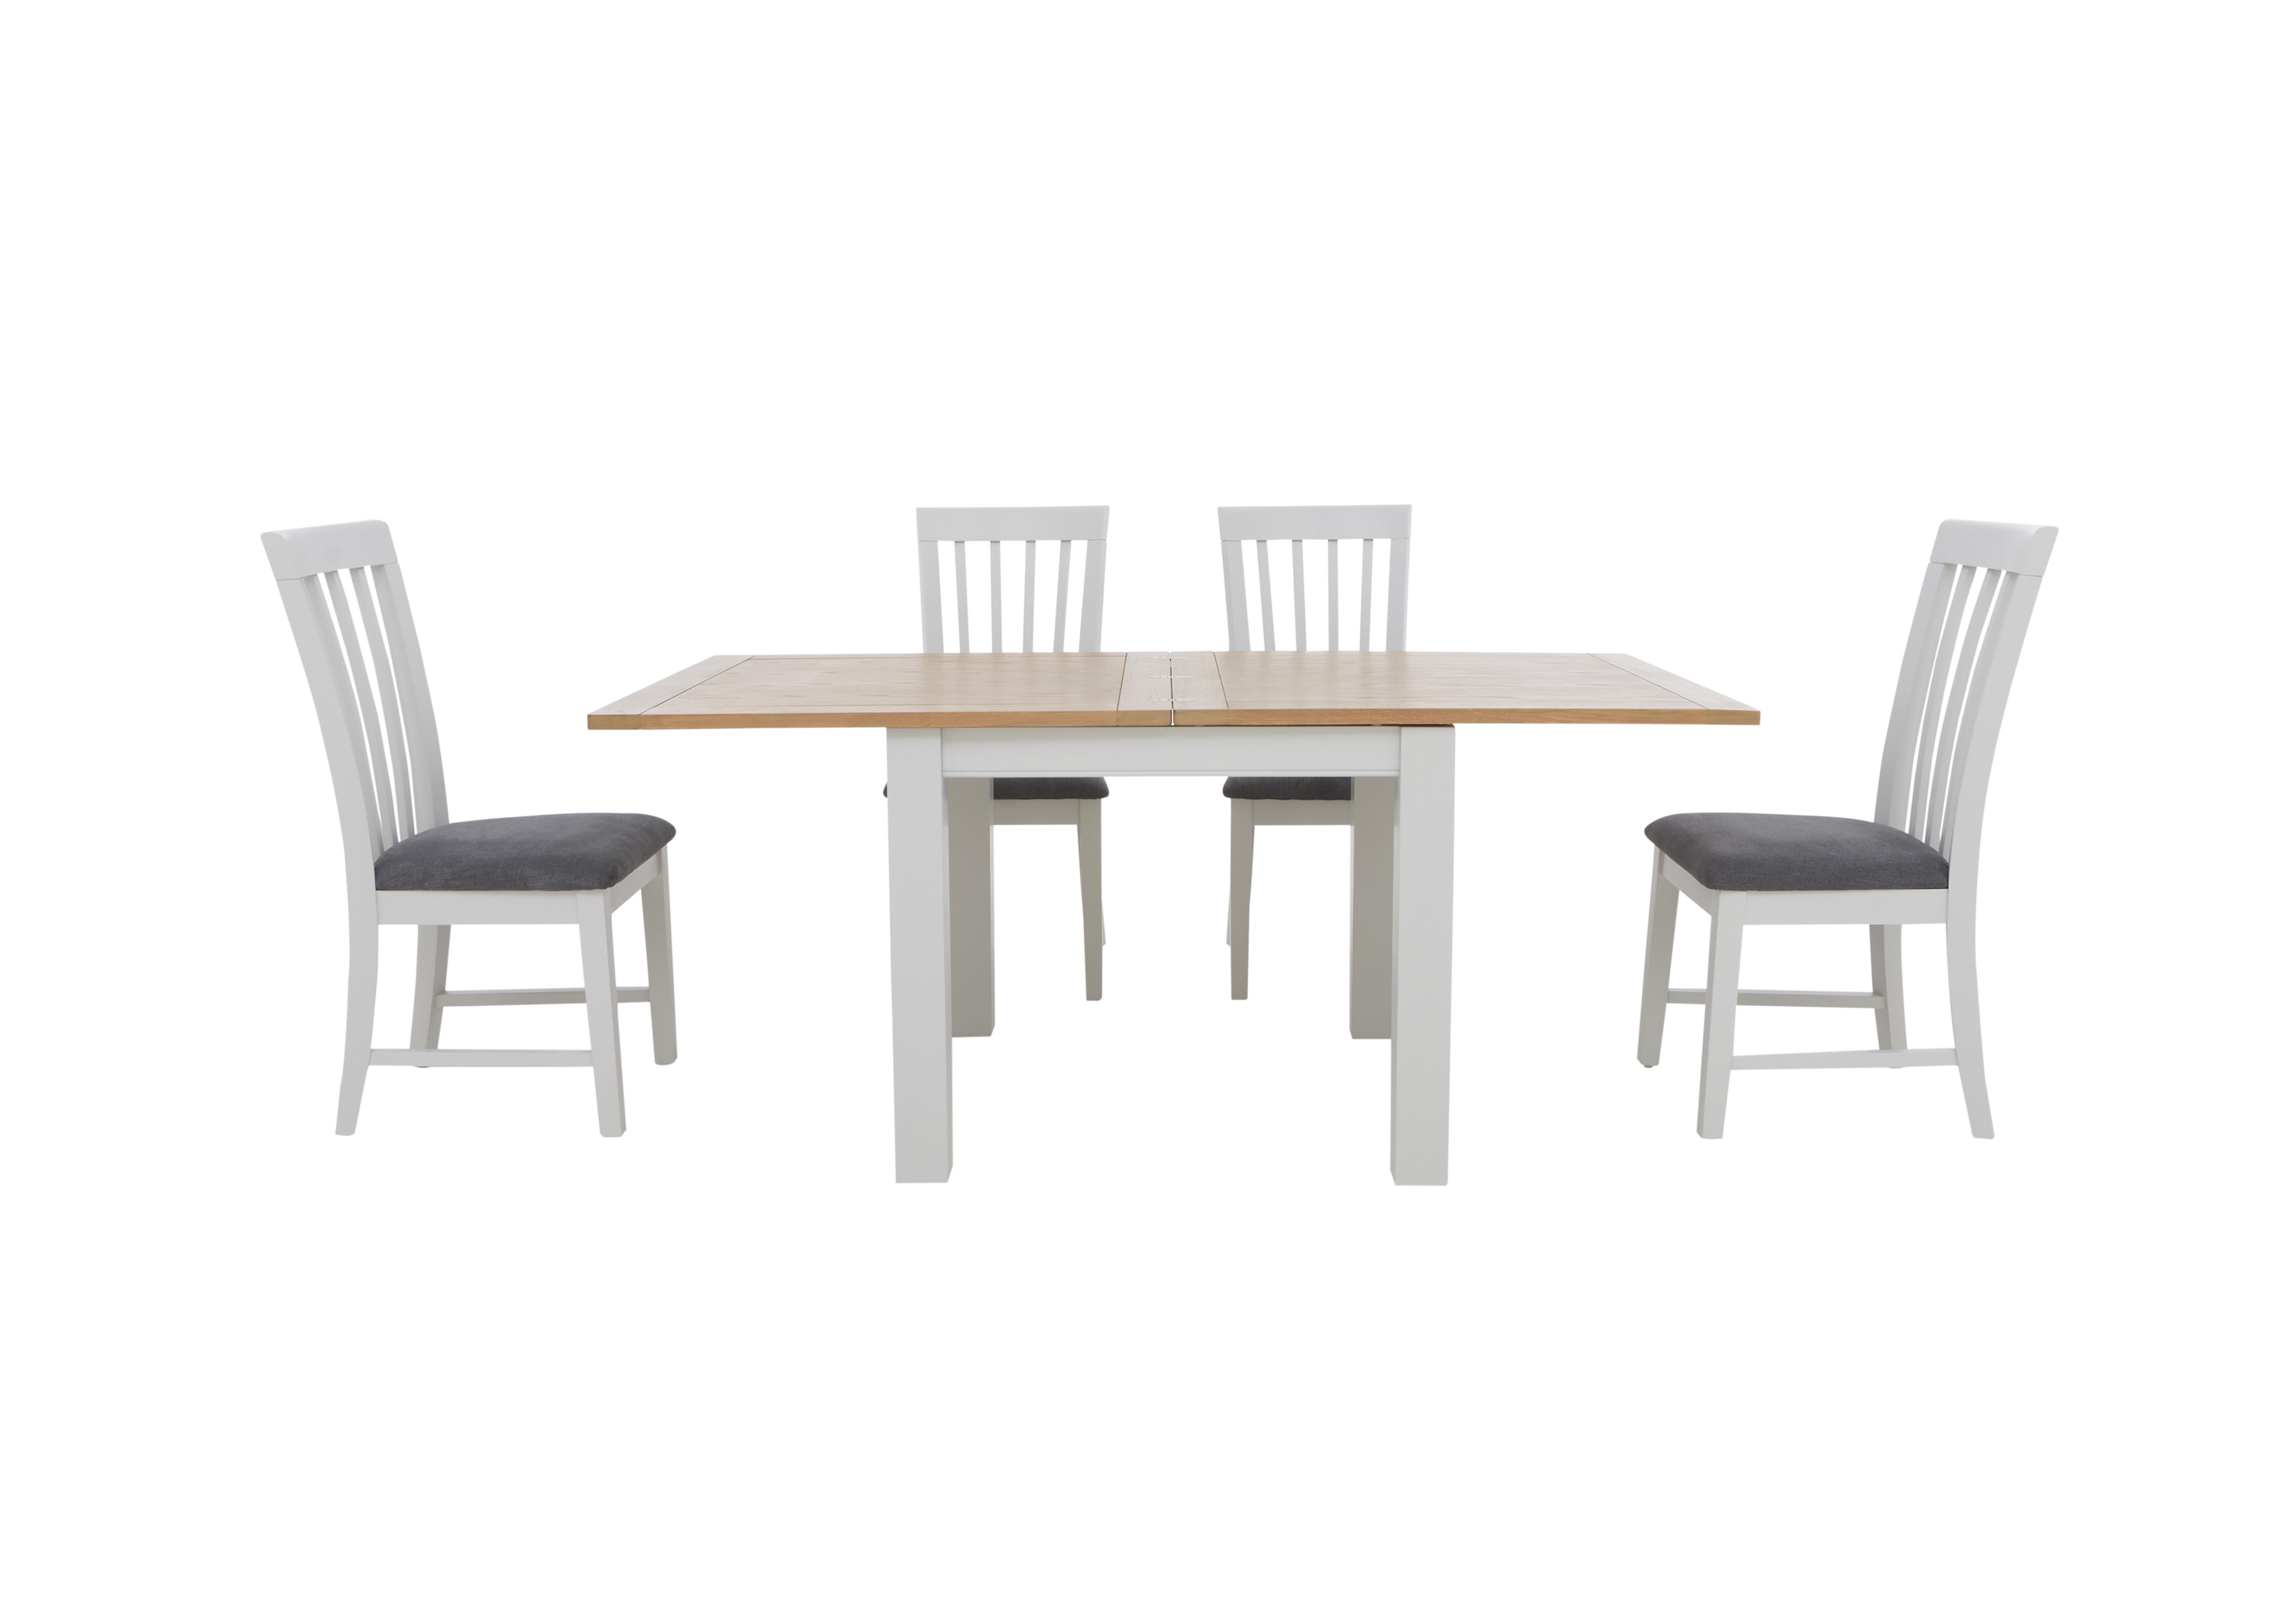 Hamilton Flip Top Dining Table and 4 Wooden Dining Chairs in  on Furniture Village